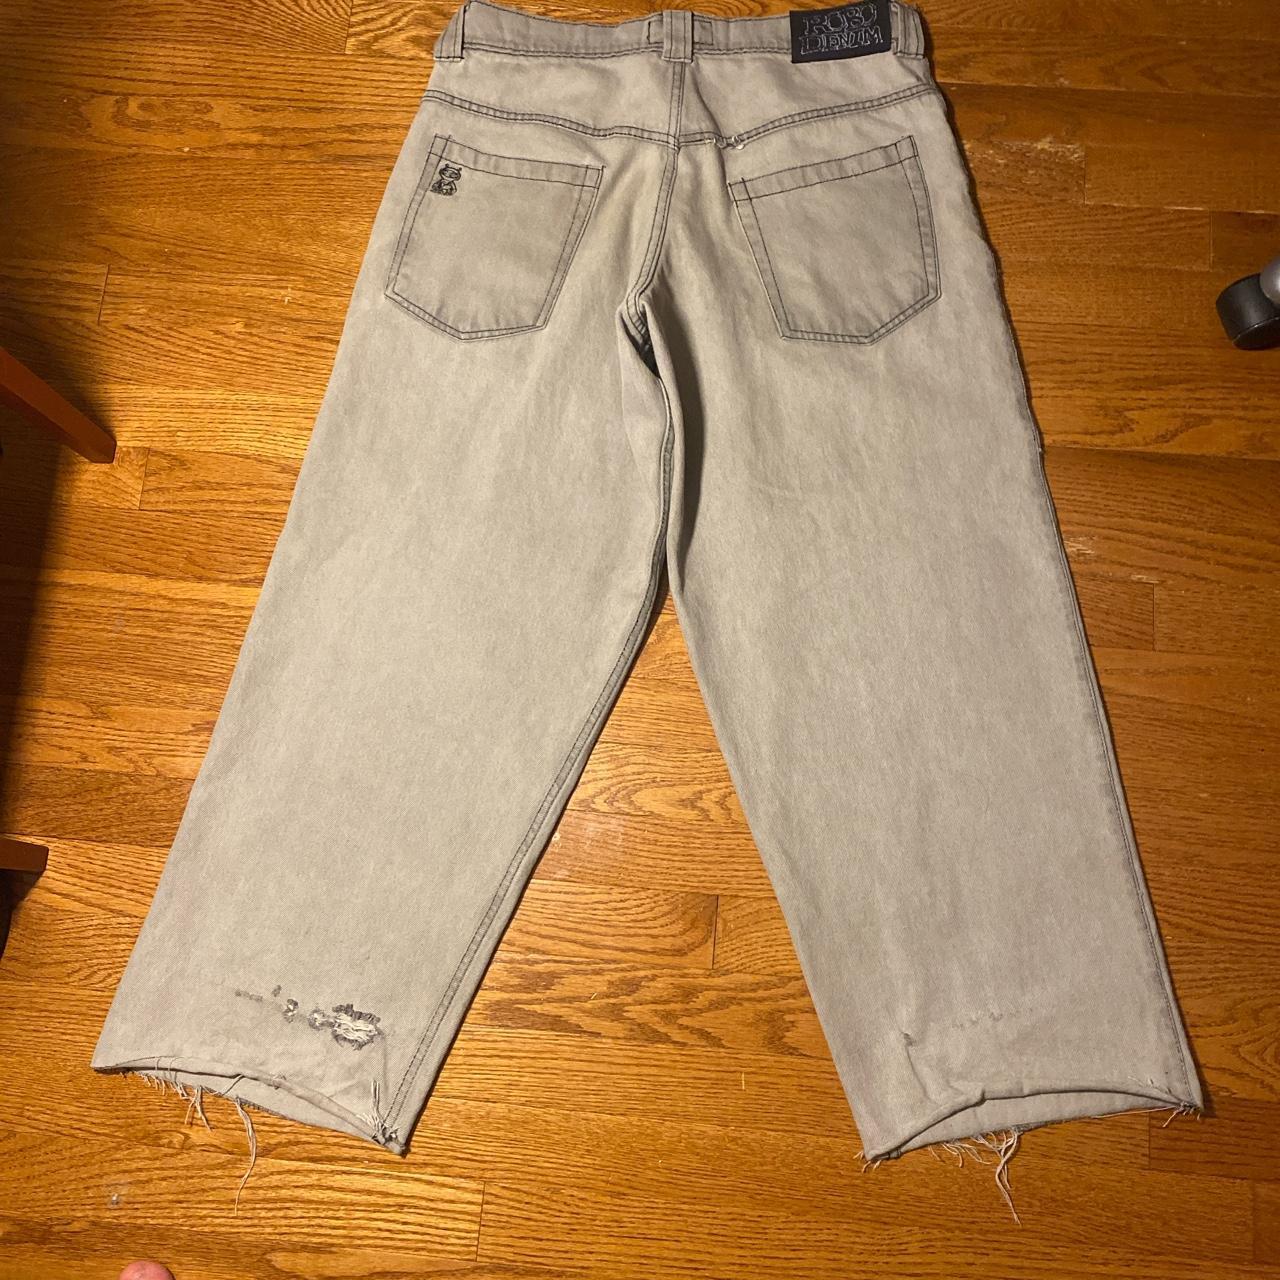 Digits 238 jeans in grey black stitching tagged size... - Depop